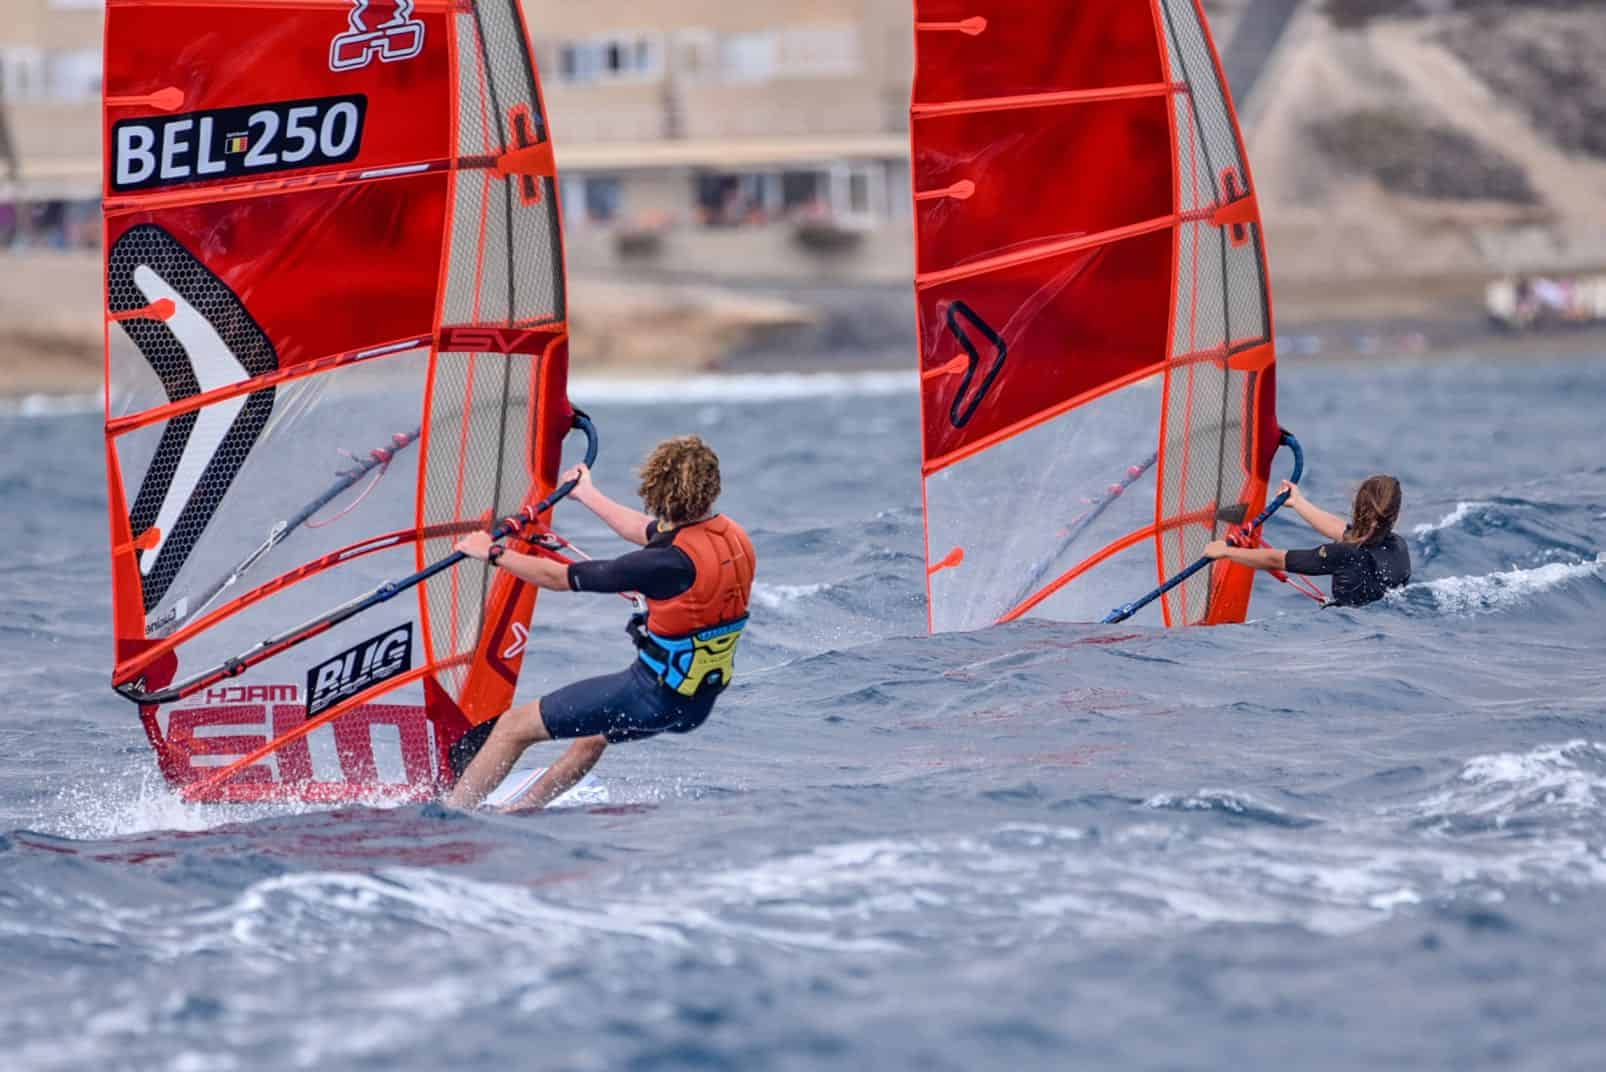 How To Be Fast In Speed Under 70 Kilos - 3 - Windsurf